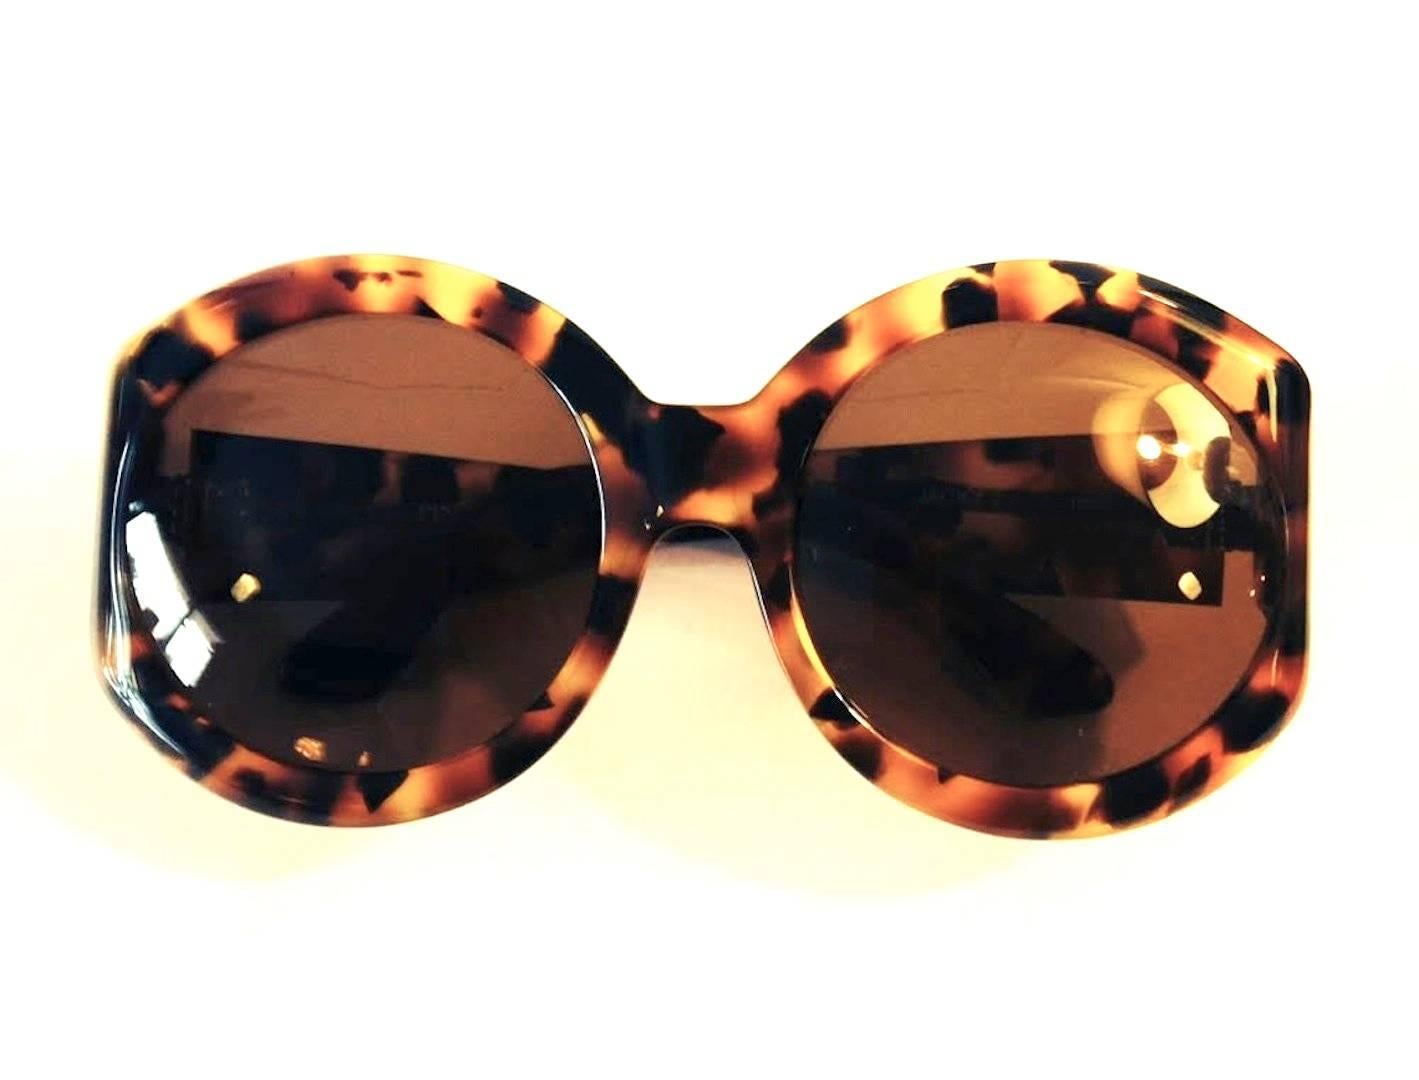 Designed and manufactured by original designer Francois Pinton for Jacqueline Kennedy Onassis. Tortuga colored frames with flecks of black, brown, and gold.
Lens Size  - 55mm 
Bridge Width - 22mm  
Temple Length 140mm